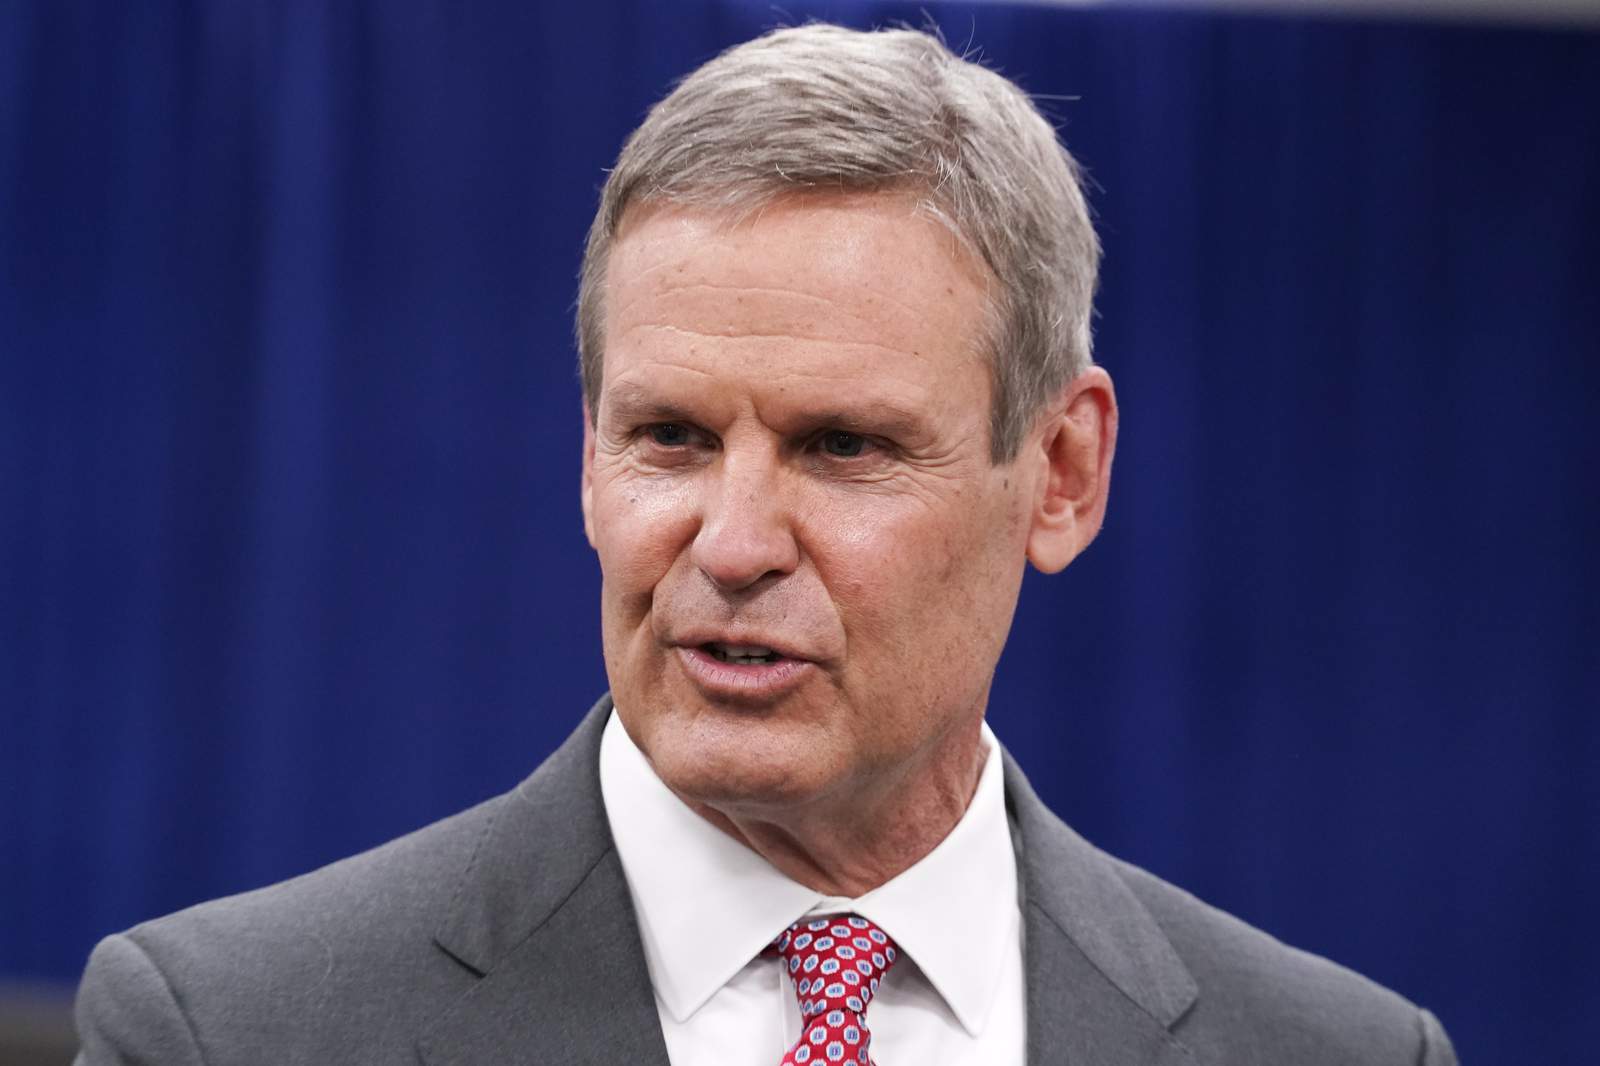 Tennessee governor faces criticism for approach to virus